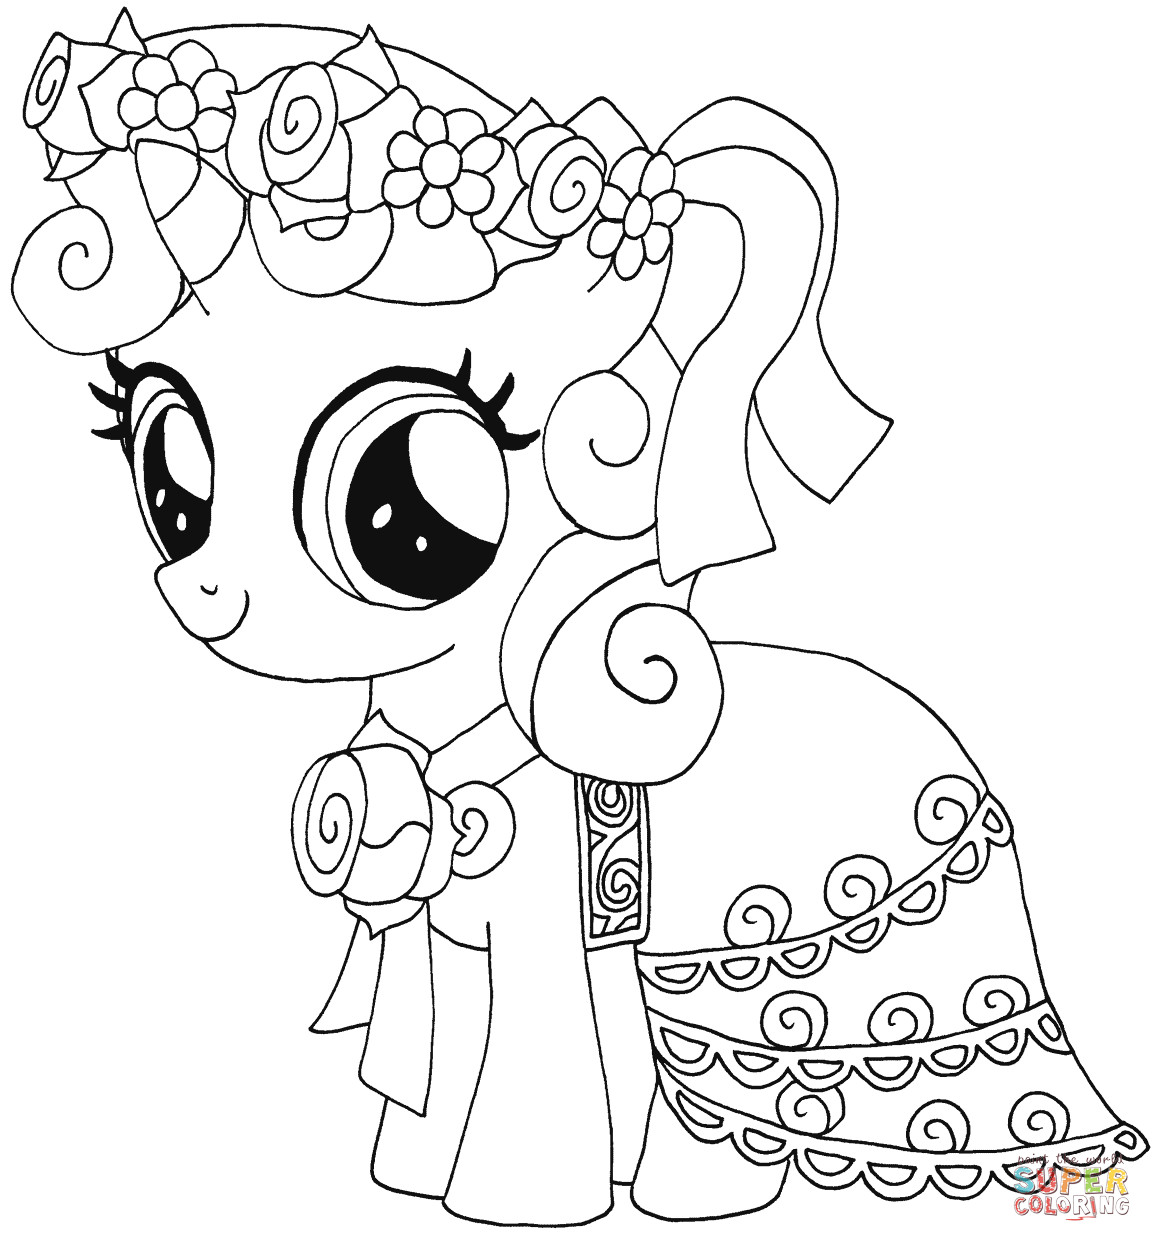 Pony Printable Coloring Pages
 My Little Pony Sweetie Belle coloring page